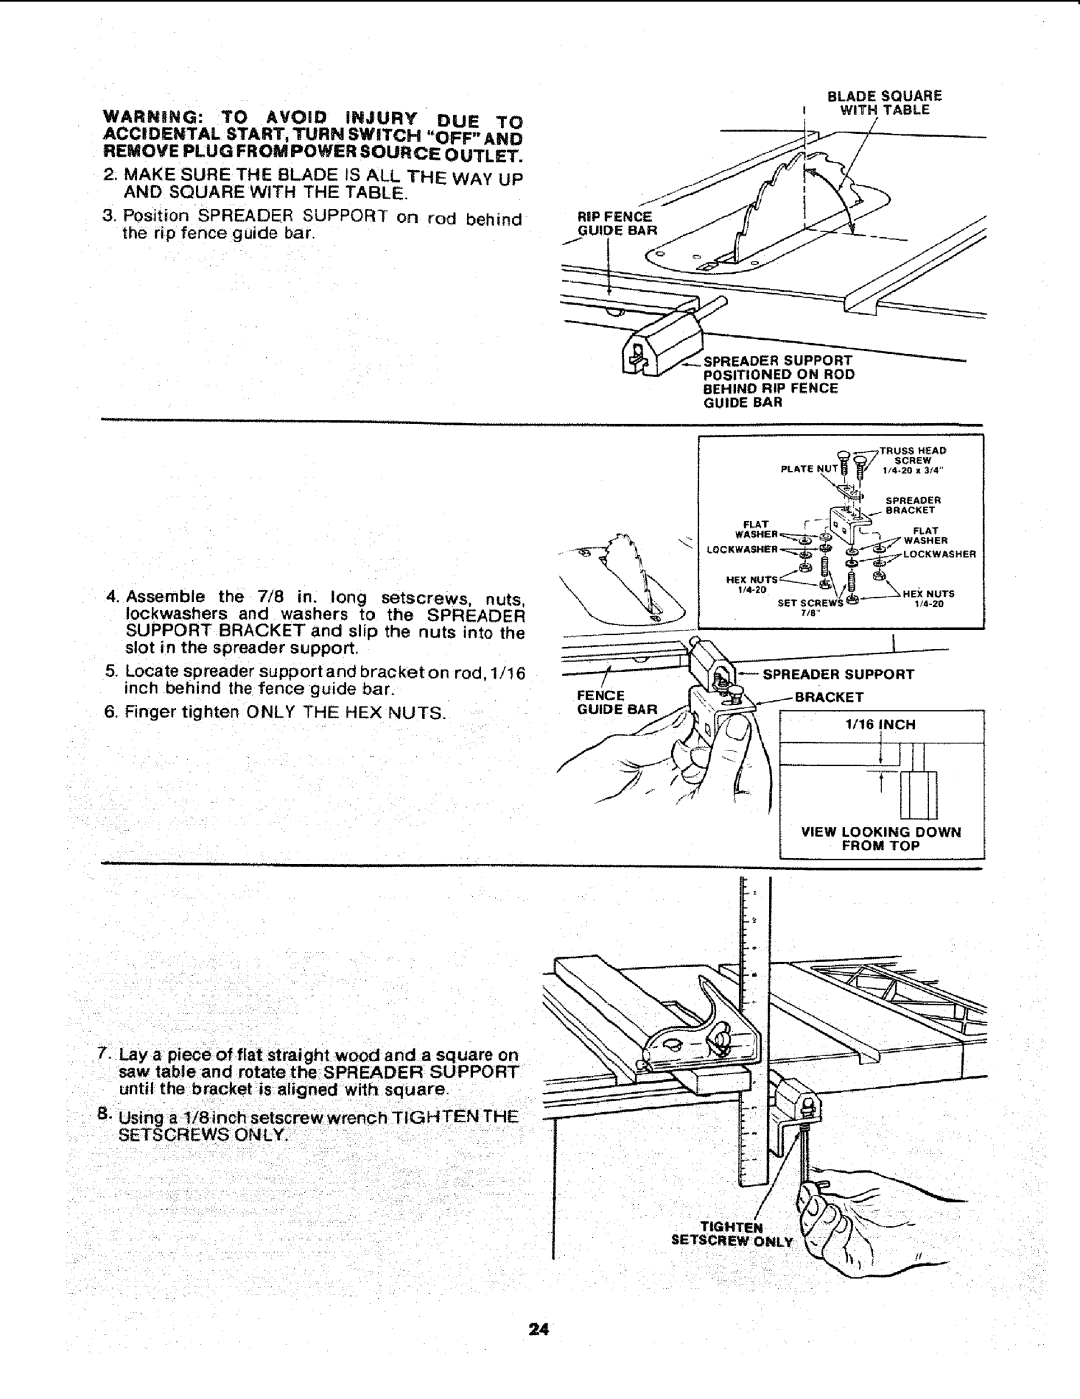 Sears 113.241591 Warning To Avoid Injury Due To Accidental Start, Turn Switch Off And, the rip fence guide bar, Bracket 